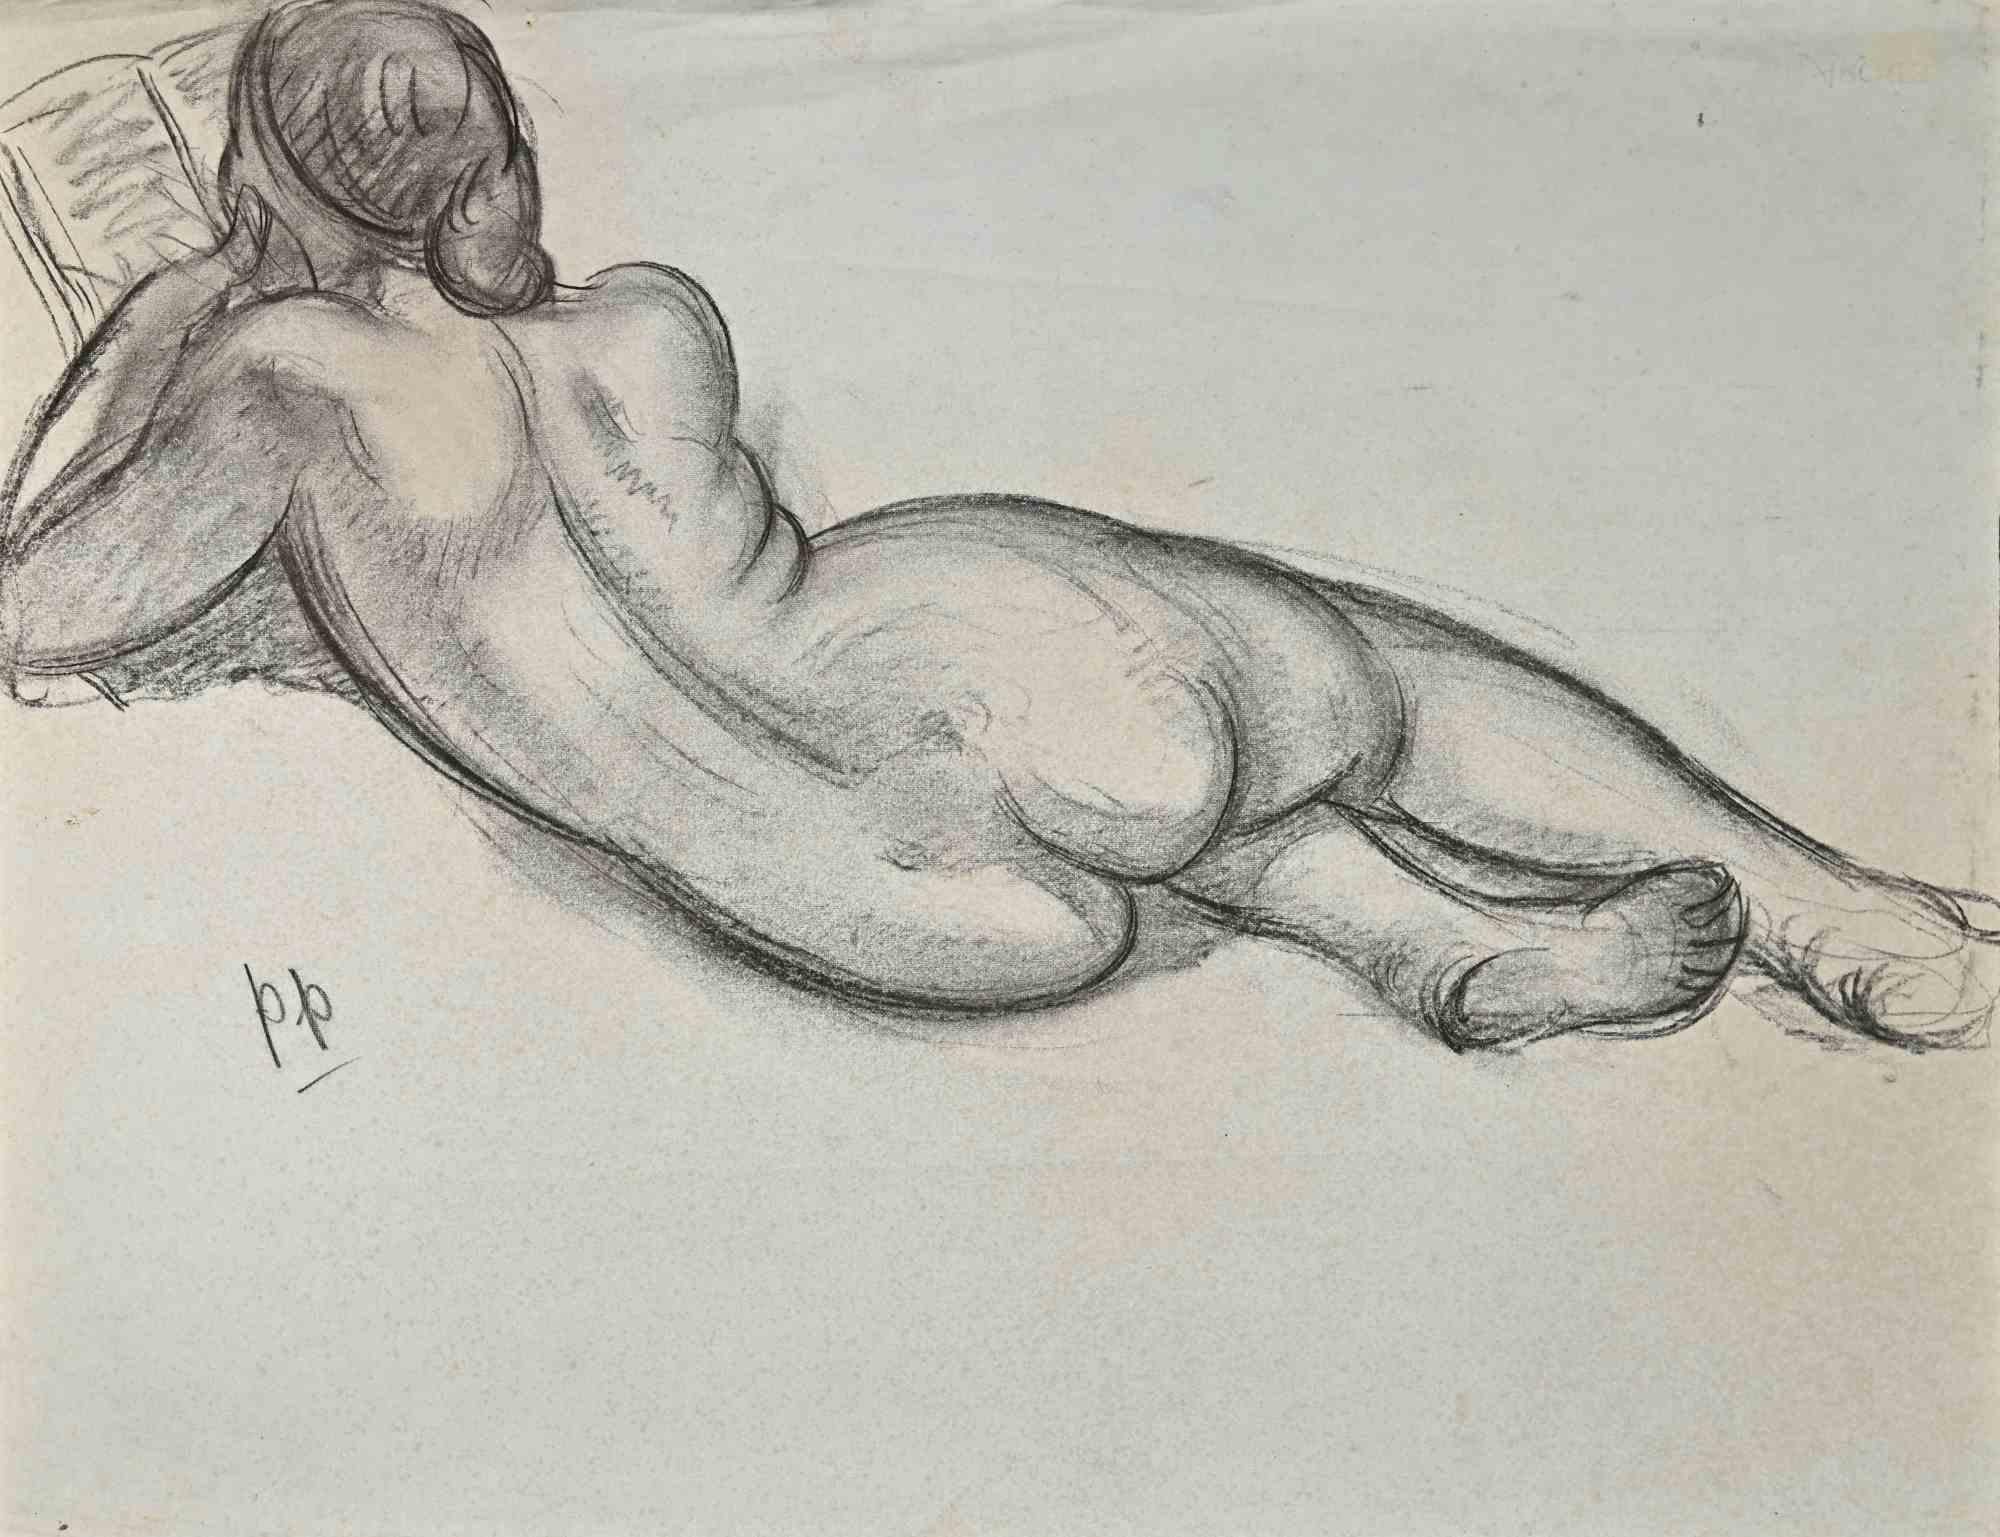 Reclined Nude from the Back - Drawing - Early 20th Century